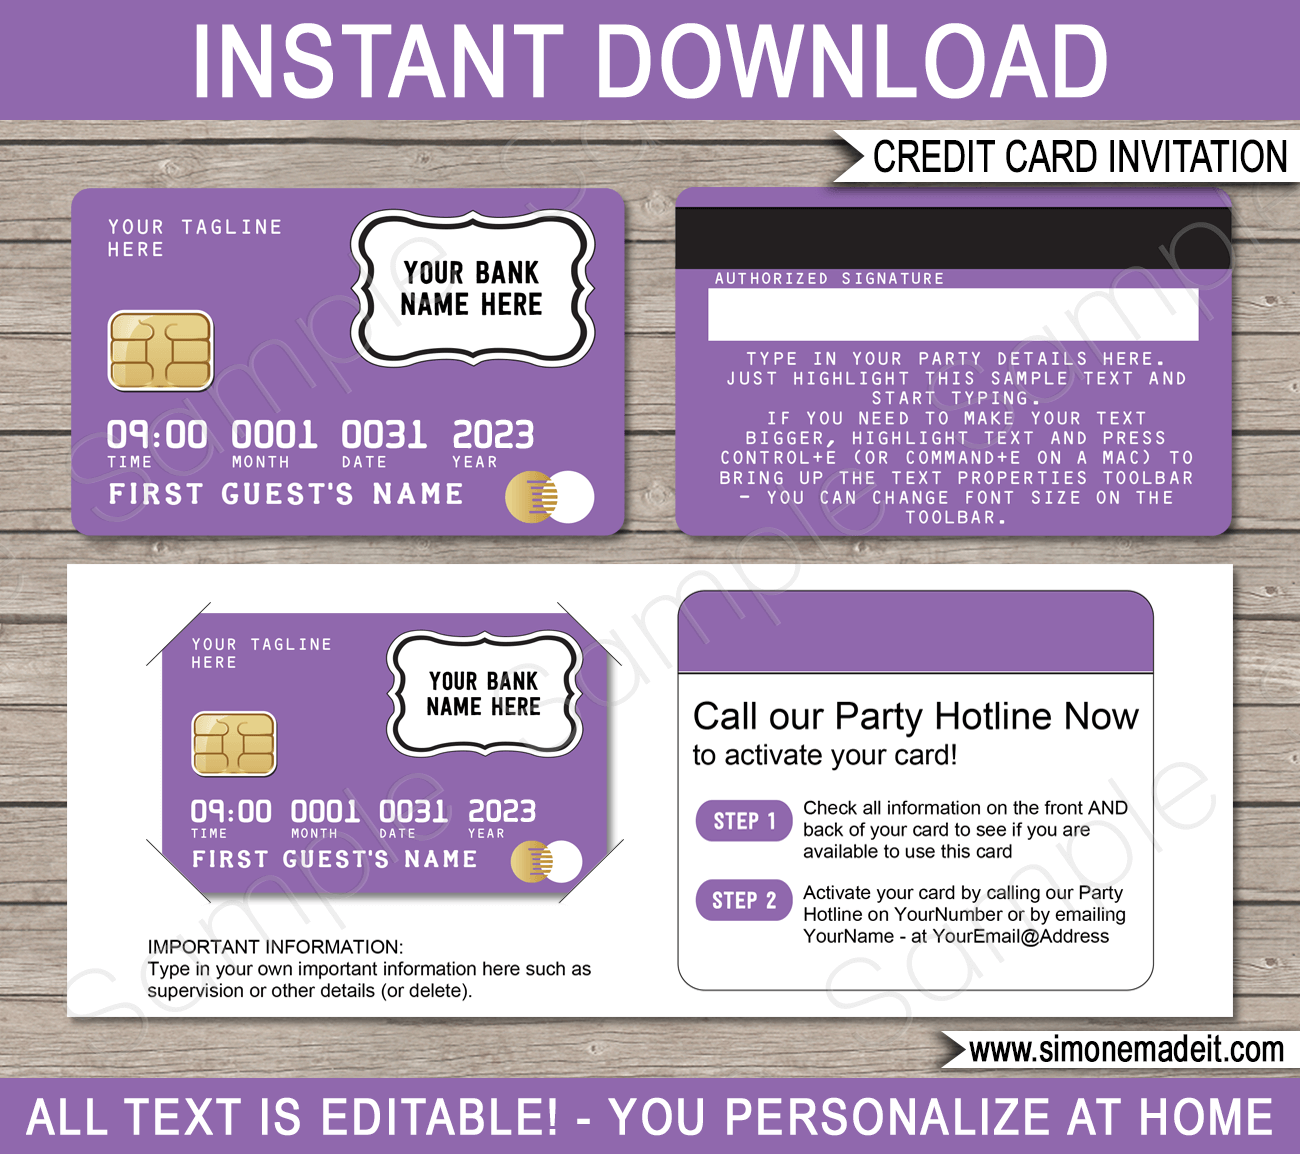 Purple Credit Card Invitations | Mall Scavenger Hunt Party Invitations | Shopping Party Theme | Editable & Printable DIY Template | $7.50 INSTANT DOWNLOAD via simonemadeit.com